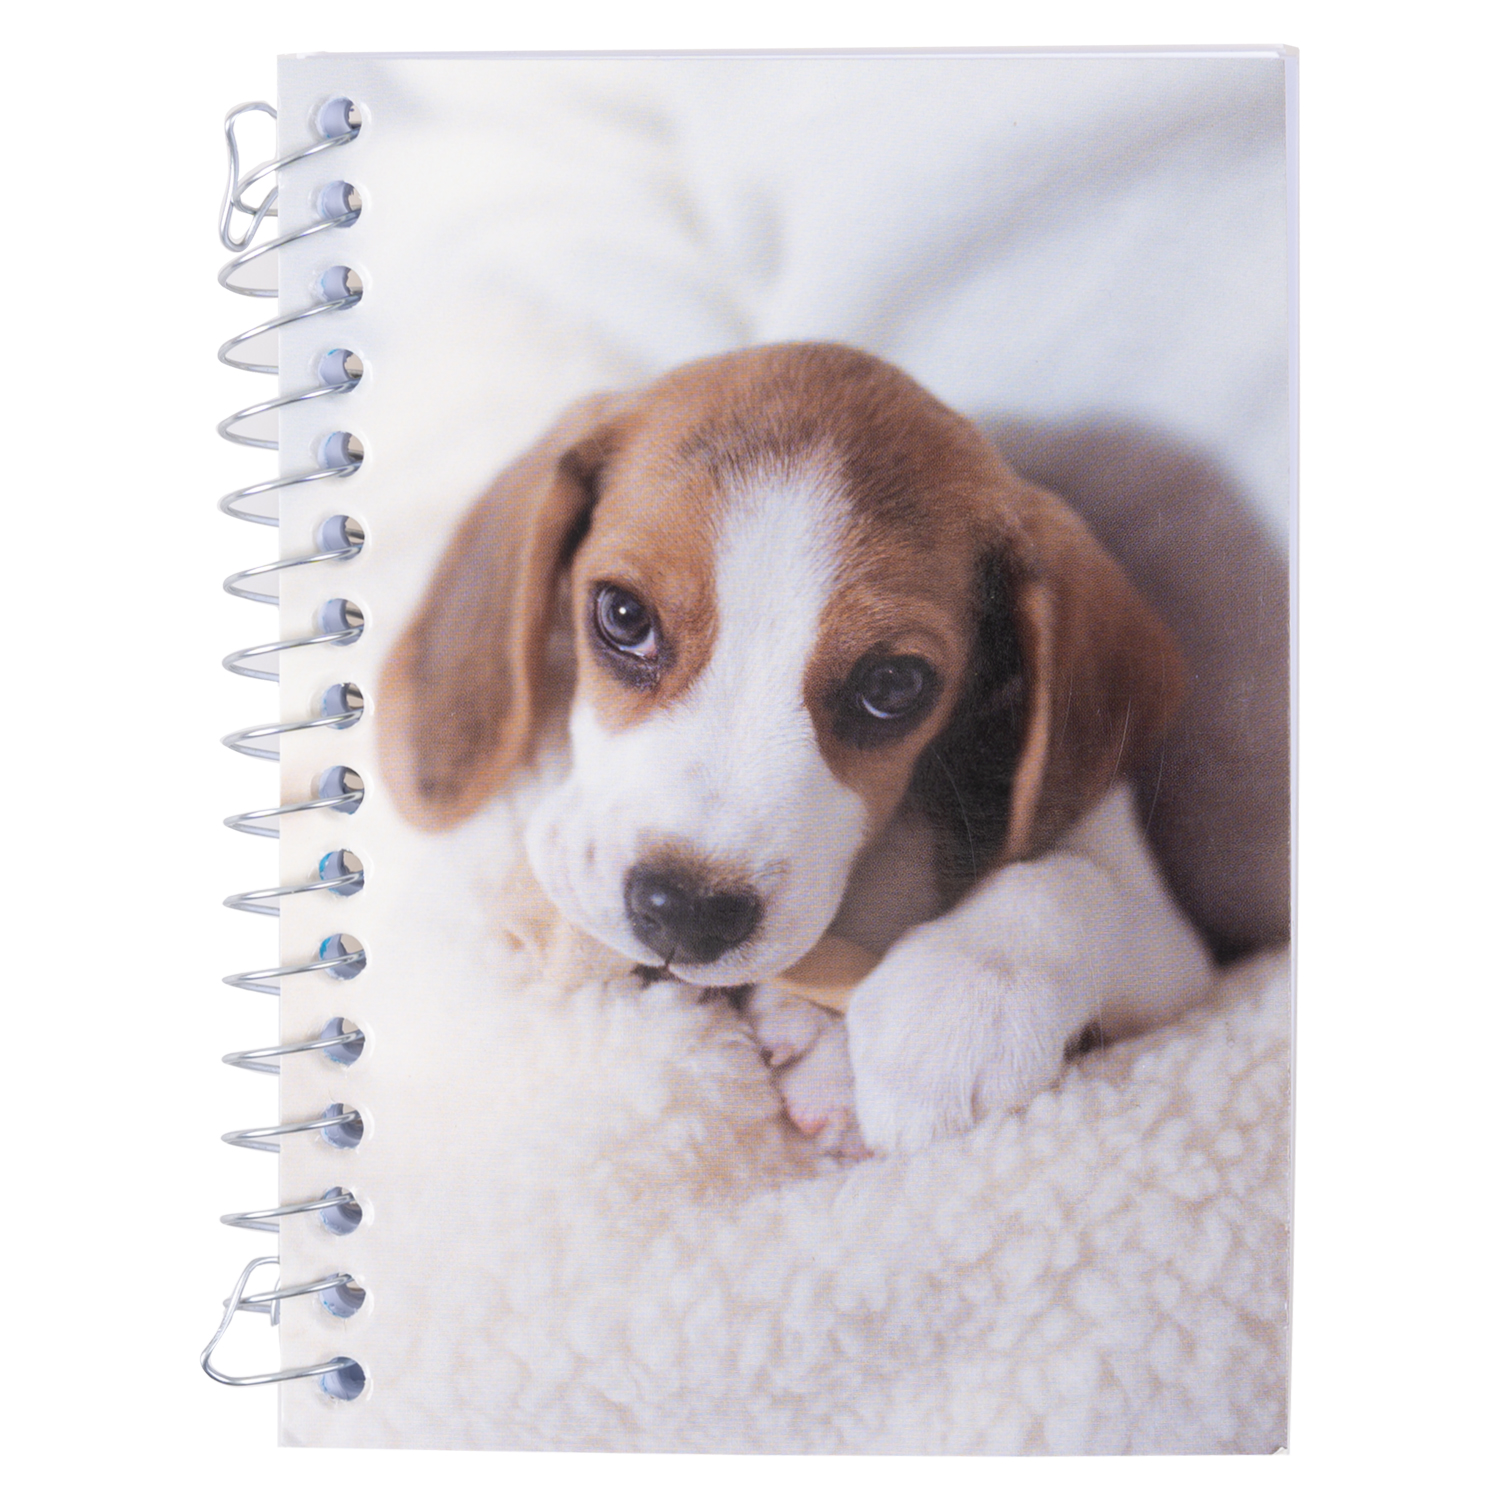 https://www.rossy.ca/media/A2W/products/chiot-beagle-mini-cahier-spirale-240-pages-74157-1.jpg